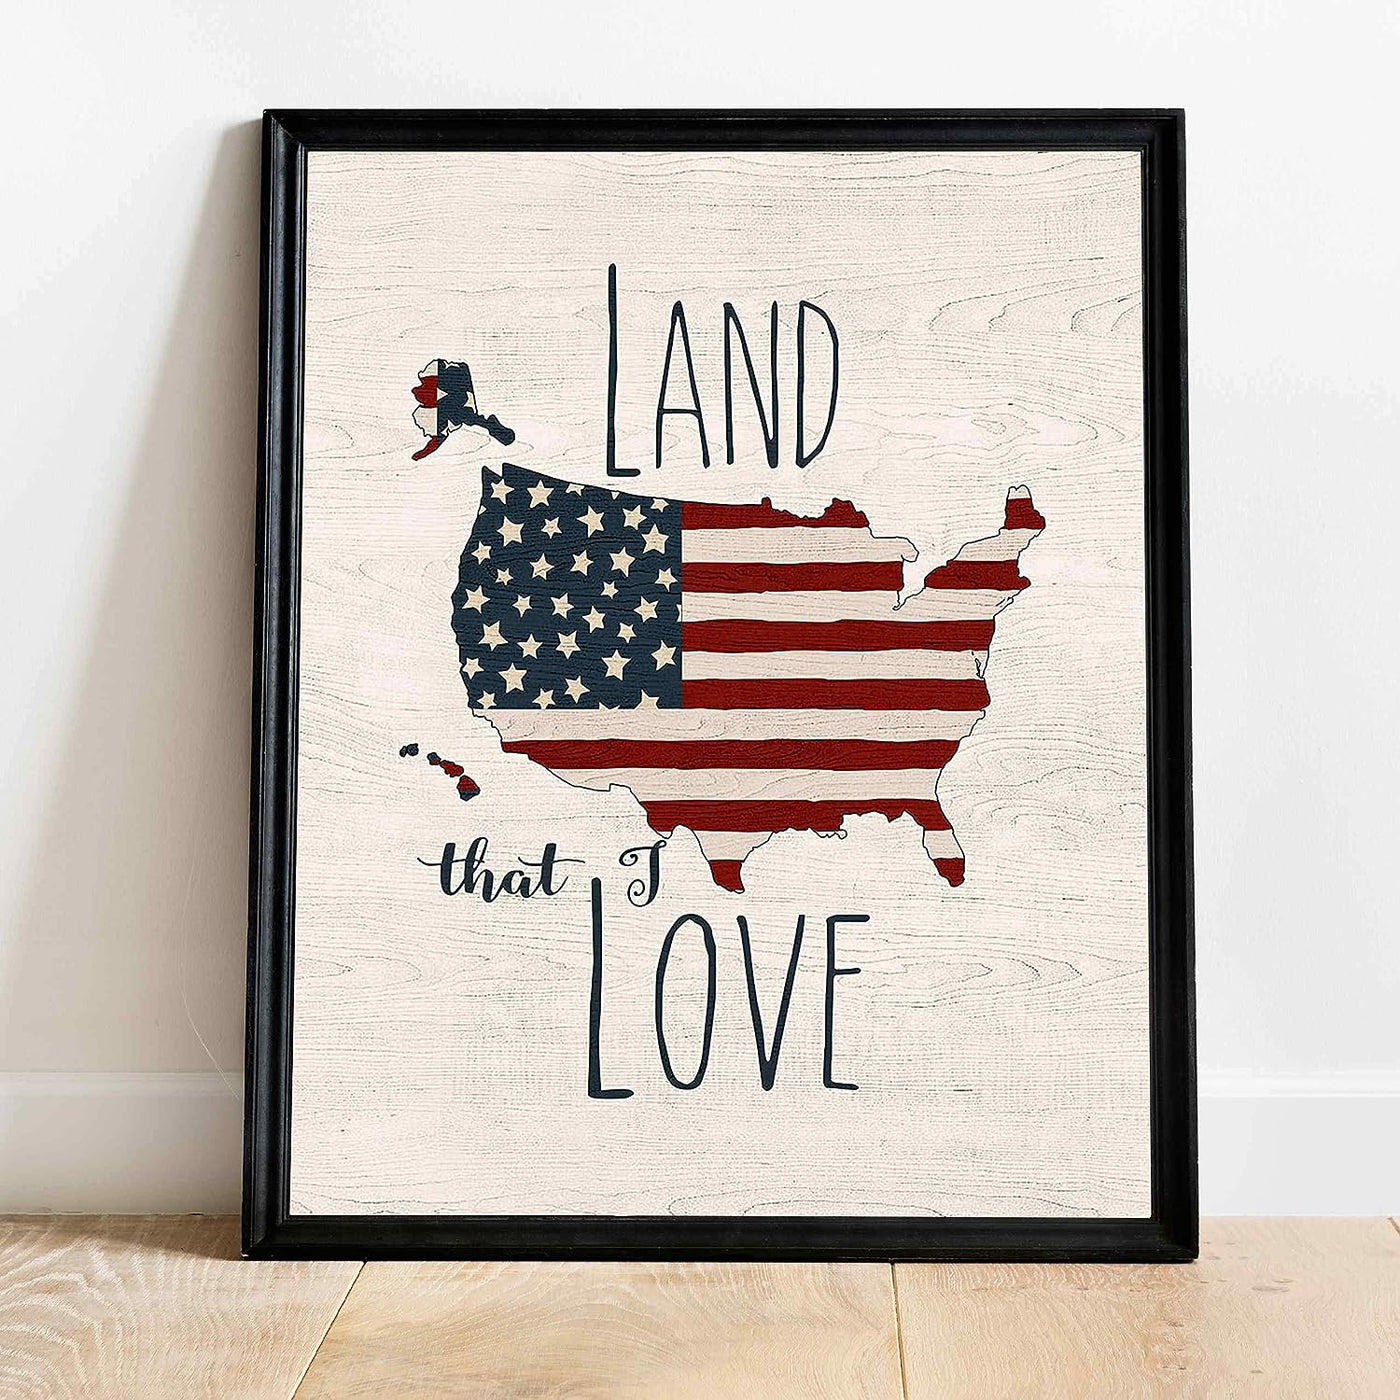 Land That I Love -Patriotic Wall Decor -11 x 14" American Flag USA Print-Ready to Frame. Inspirational Home-Office-School-Garage-Cave Decor. Display Your Patriotism! Printed on Paper-Not Wood.